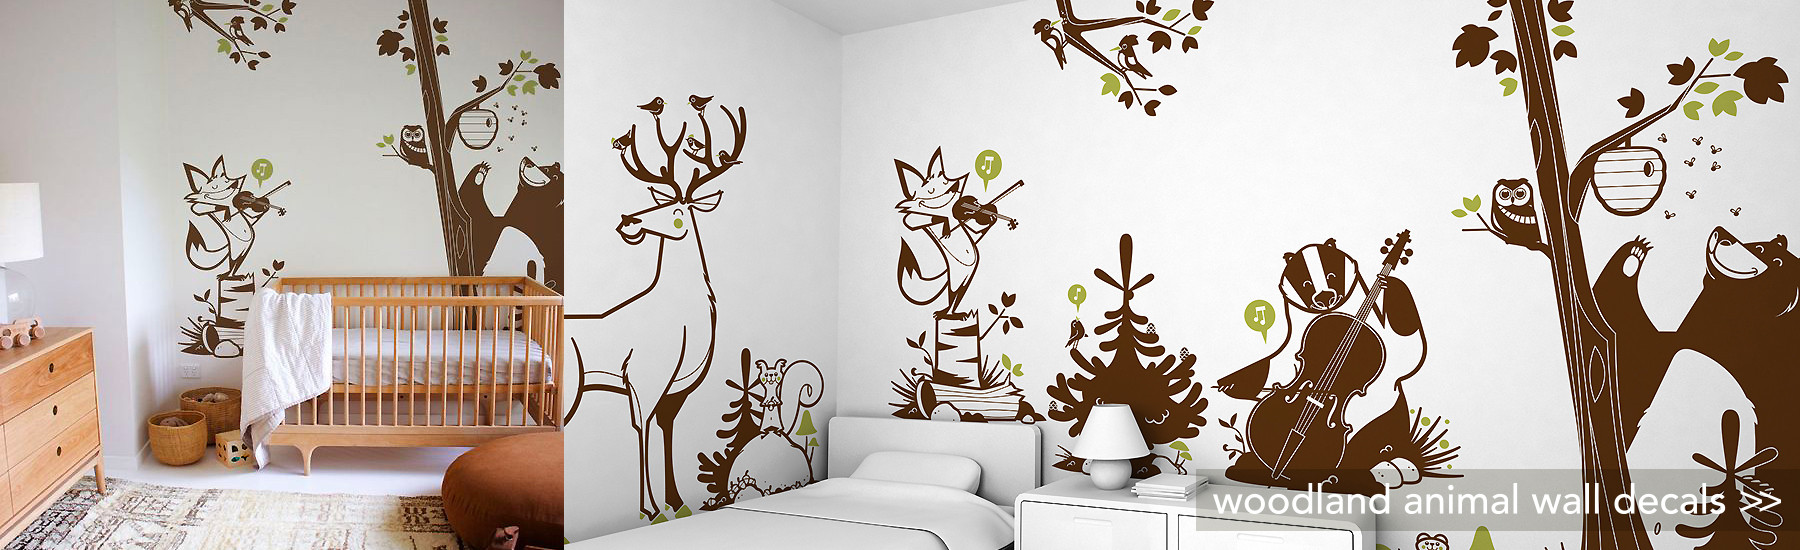 forest animal wall decals for nursery and kids room